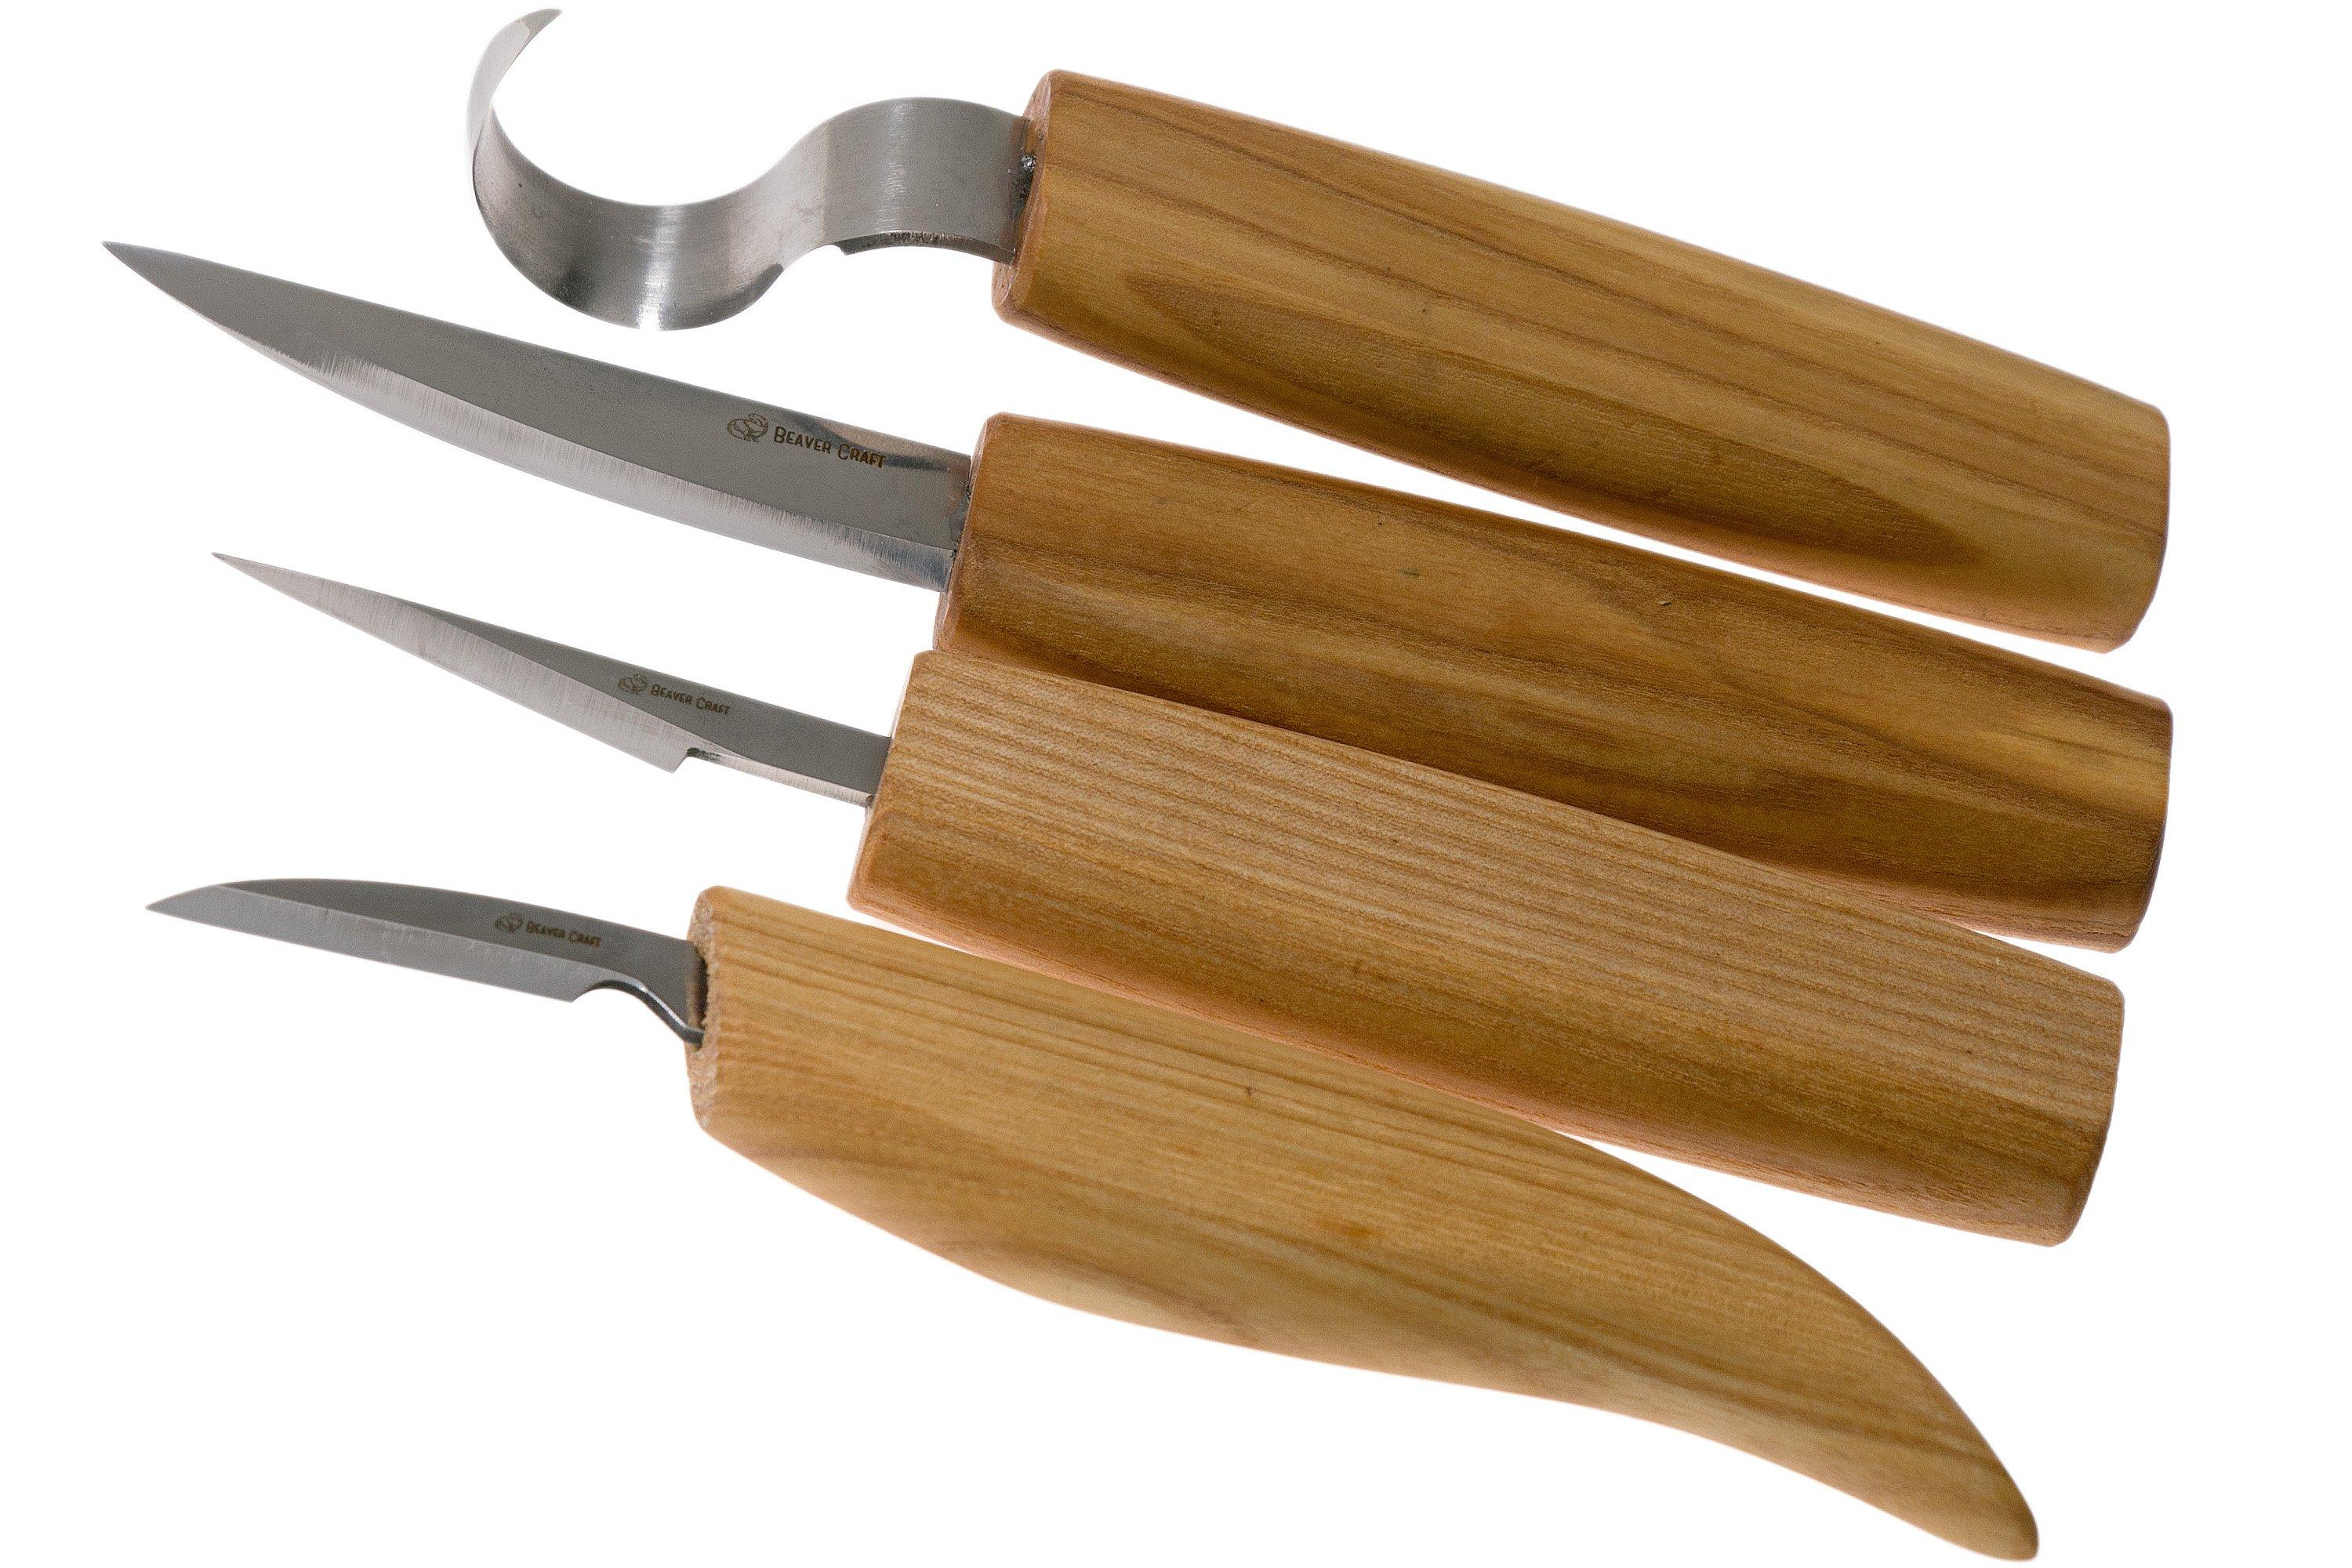 Set of 4 Wood Carving Knives in Tool Roll BeaverCraft S09